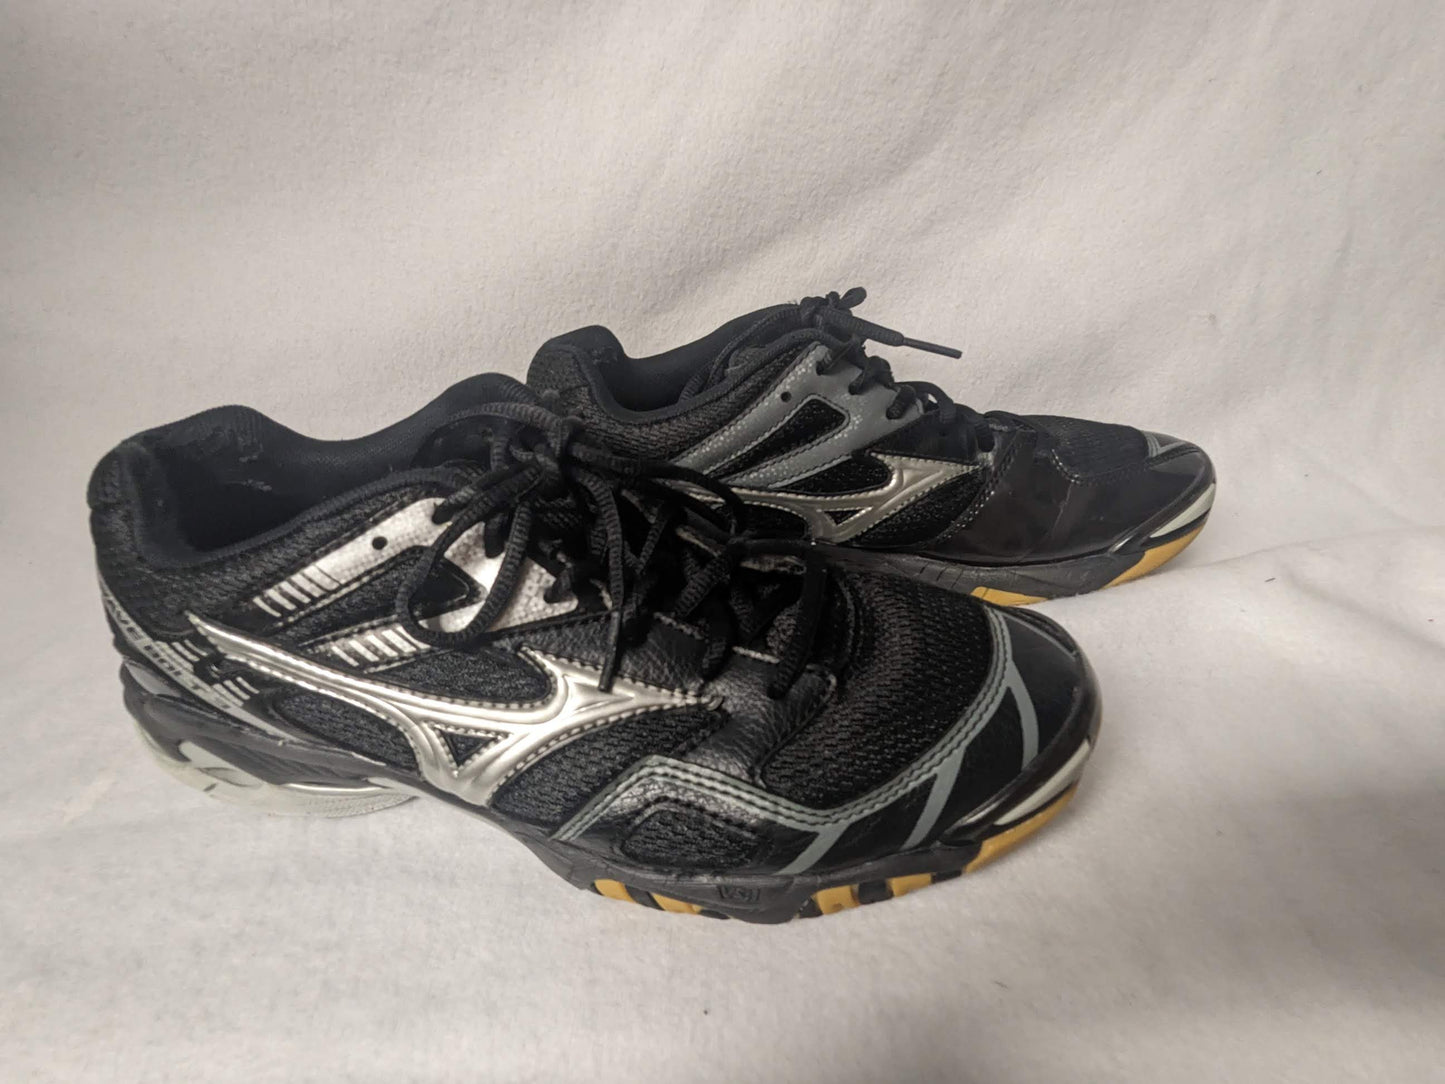 Mizuno Court Shoes Size 10 Color Black Condition Used Volleyball